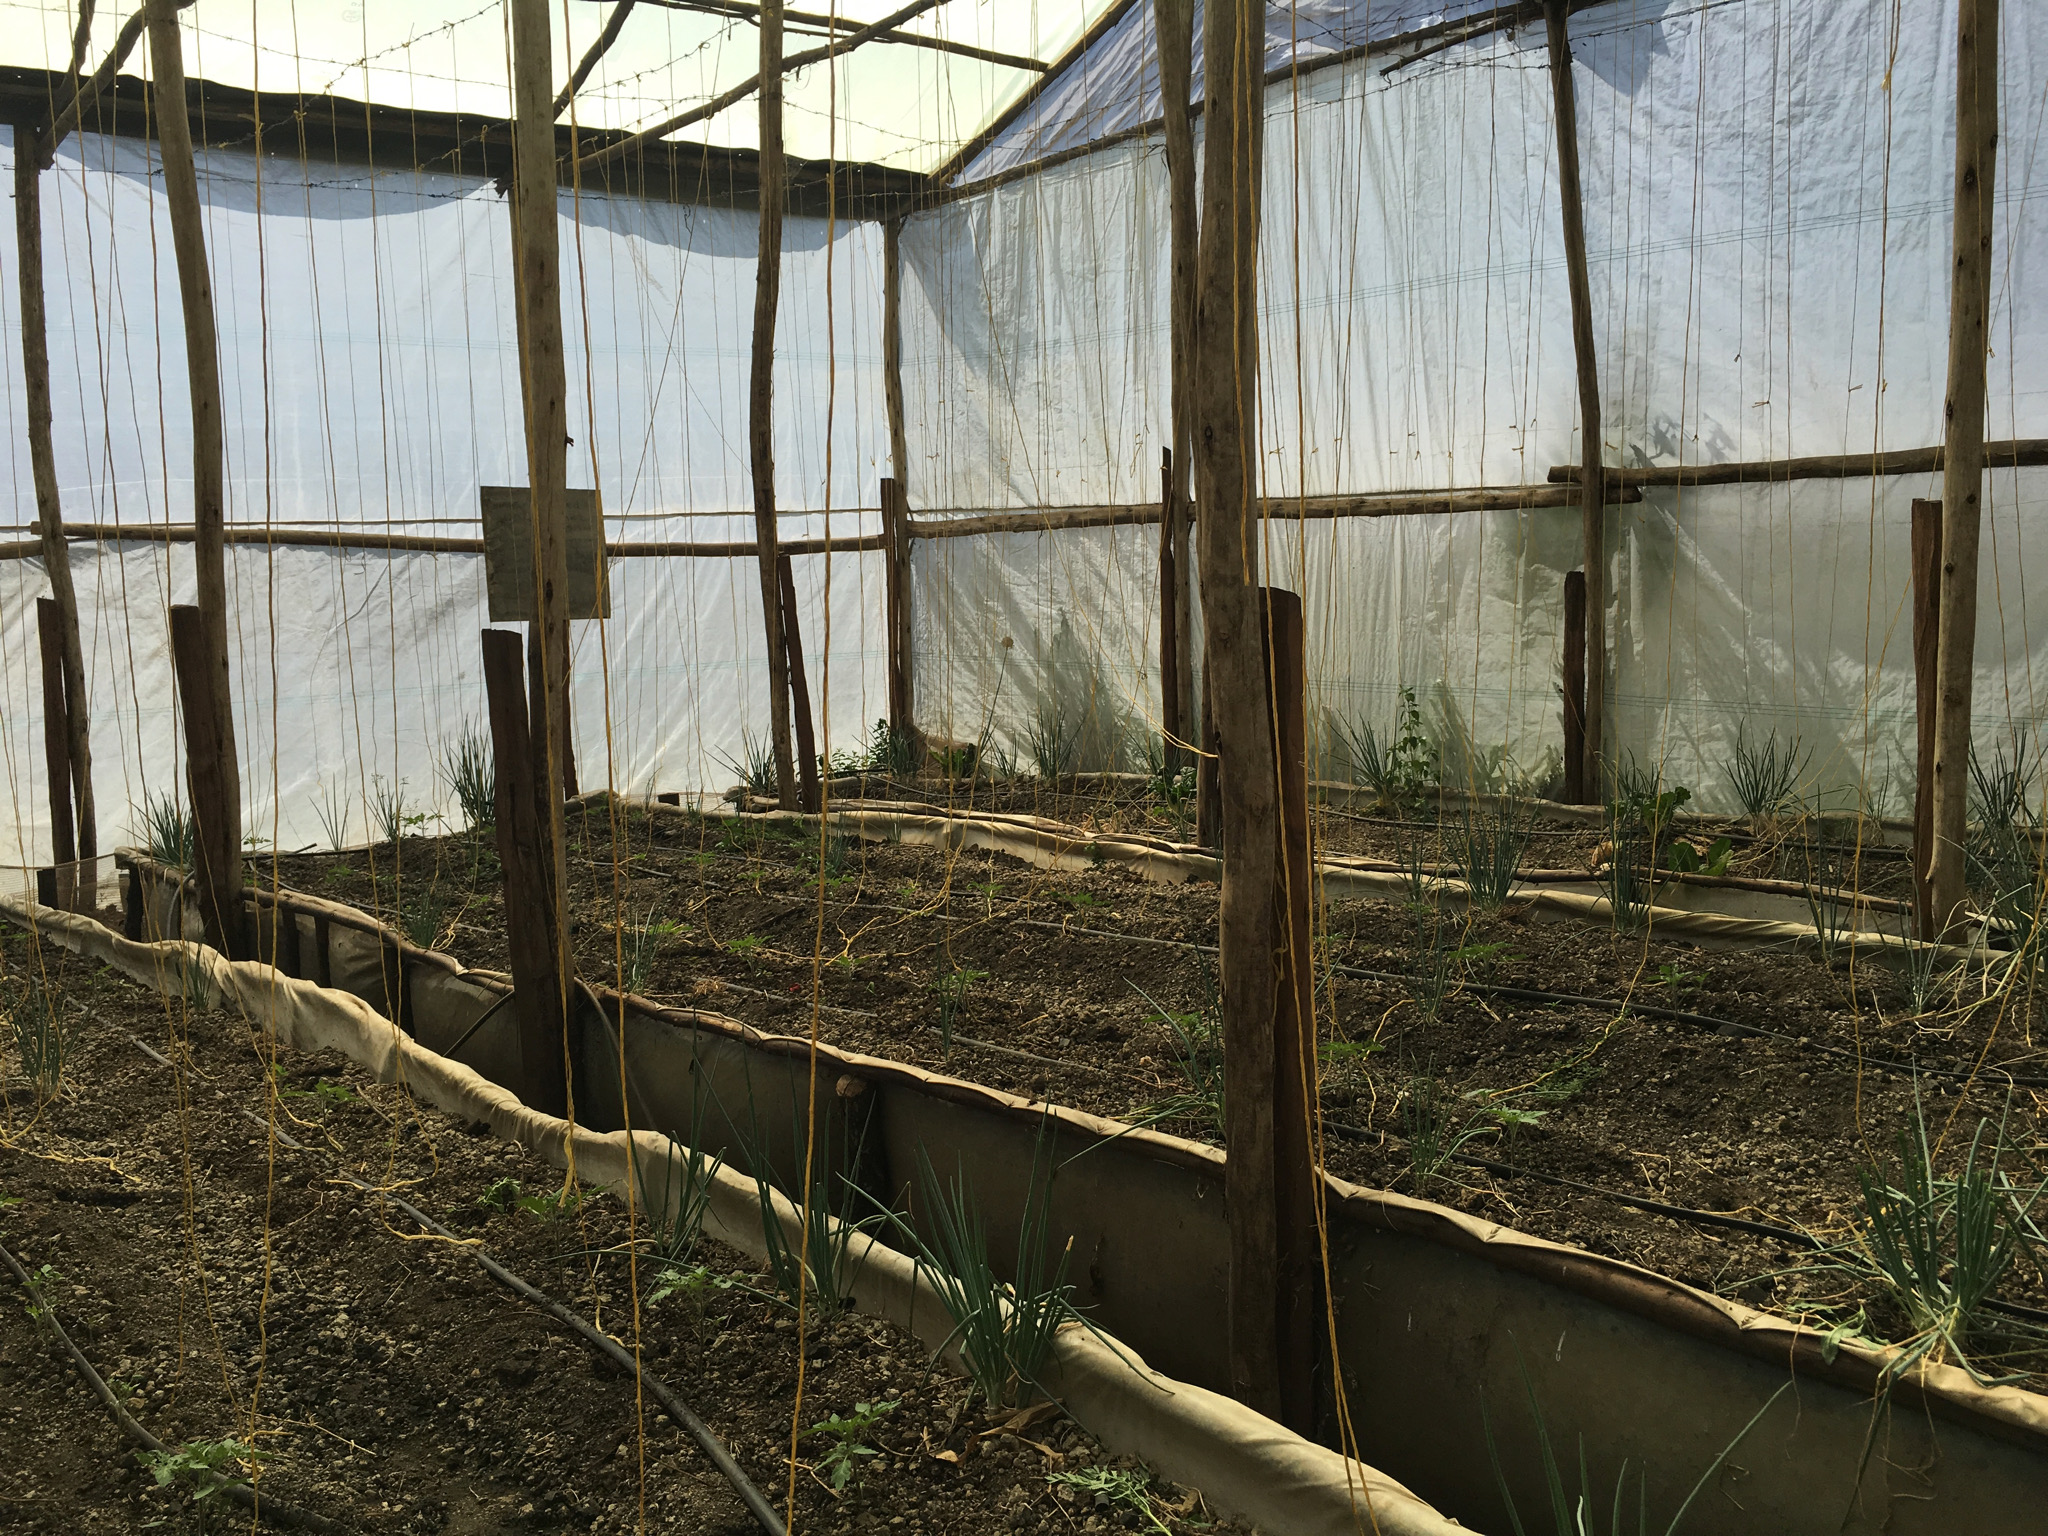 Greenhouse plants are fertilized with the effluent water from the fishponds